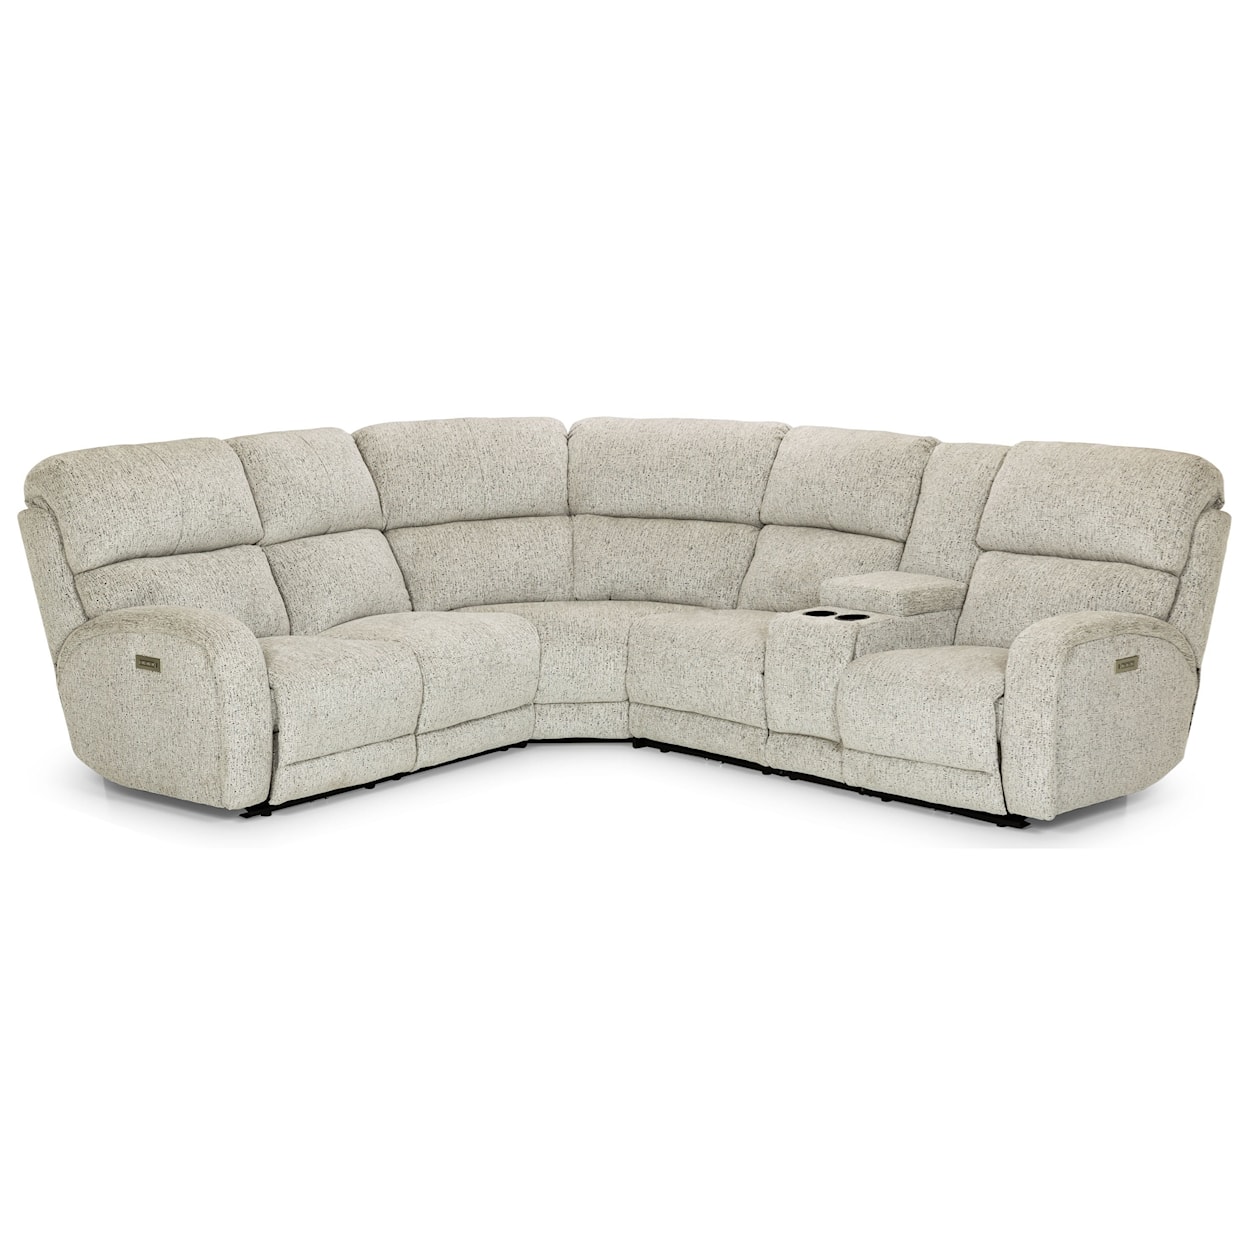 Sunset Home 858 6-Piece Reclining Sectional